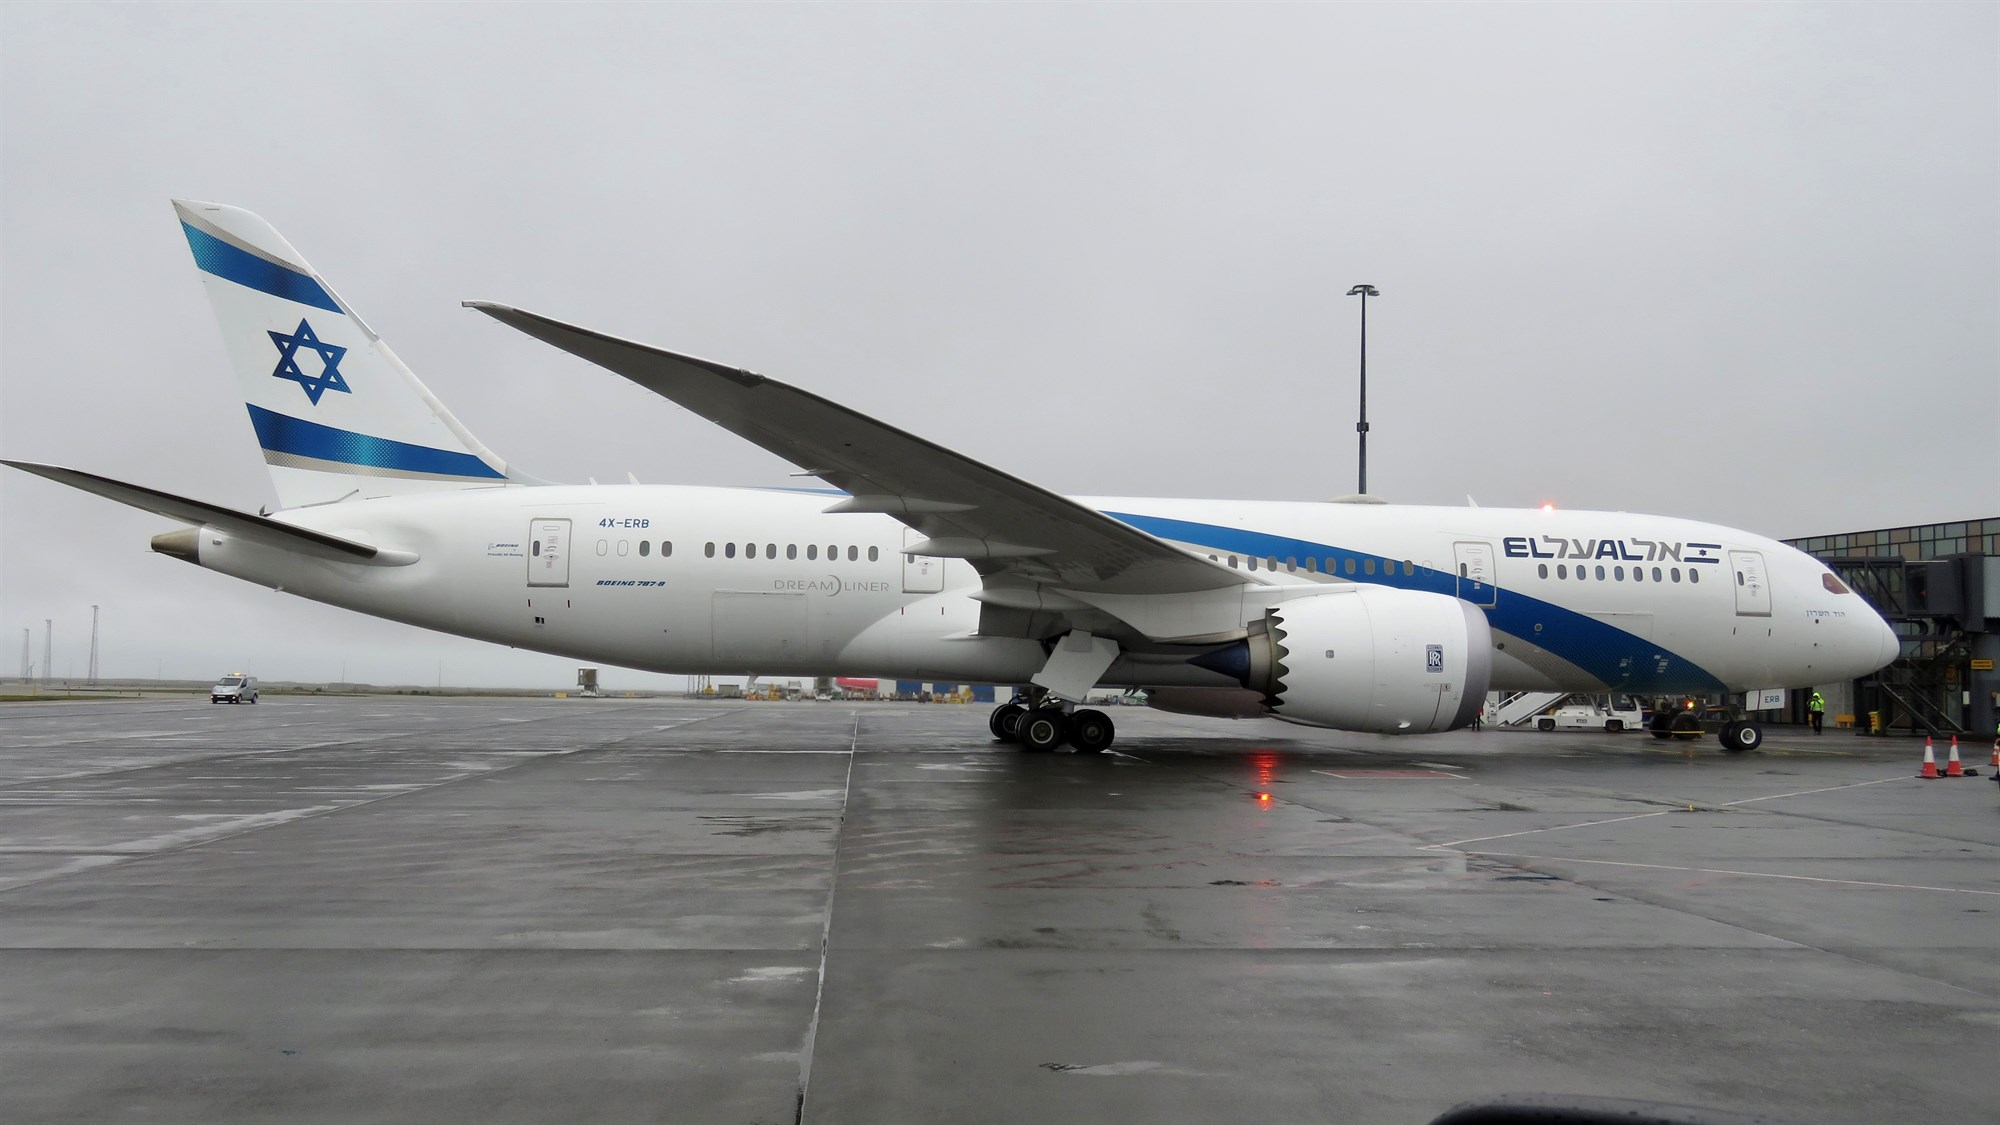 Two new airlines from Israel flying to Keflavik Airport this summer